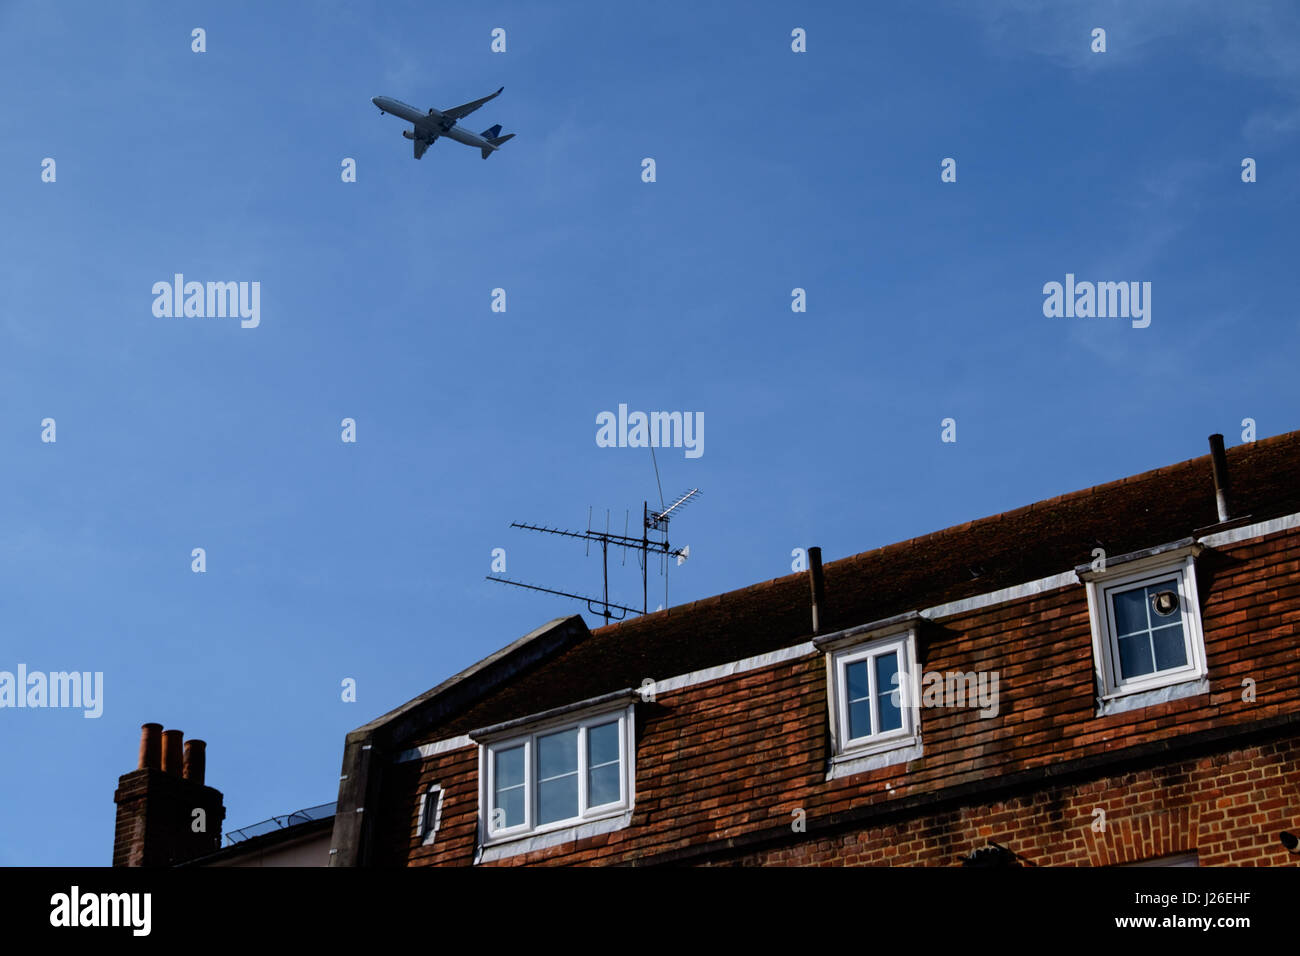 Airplane flying over a house Stock Photo